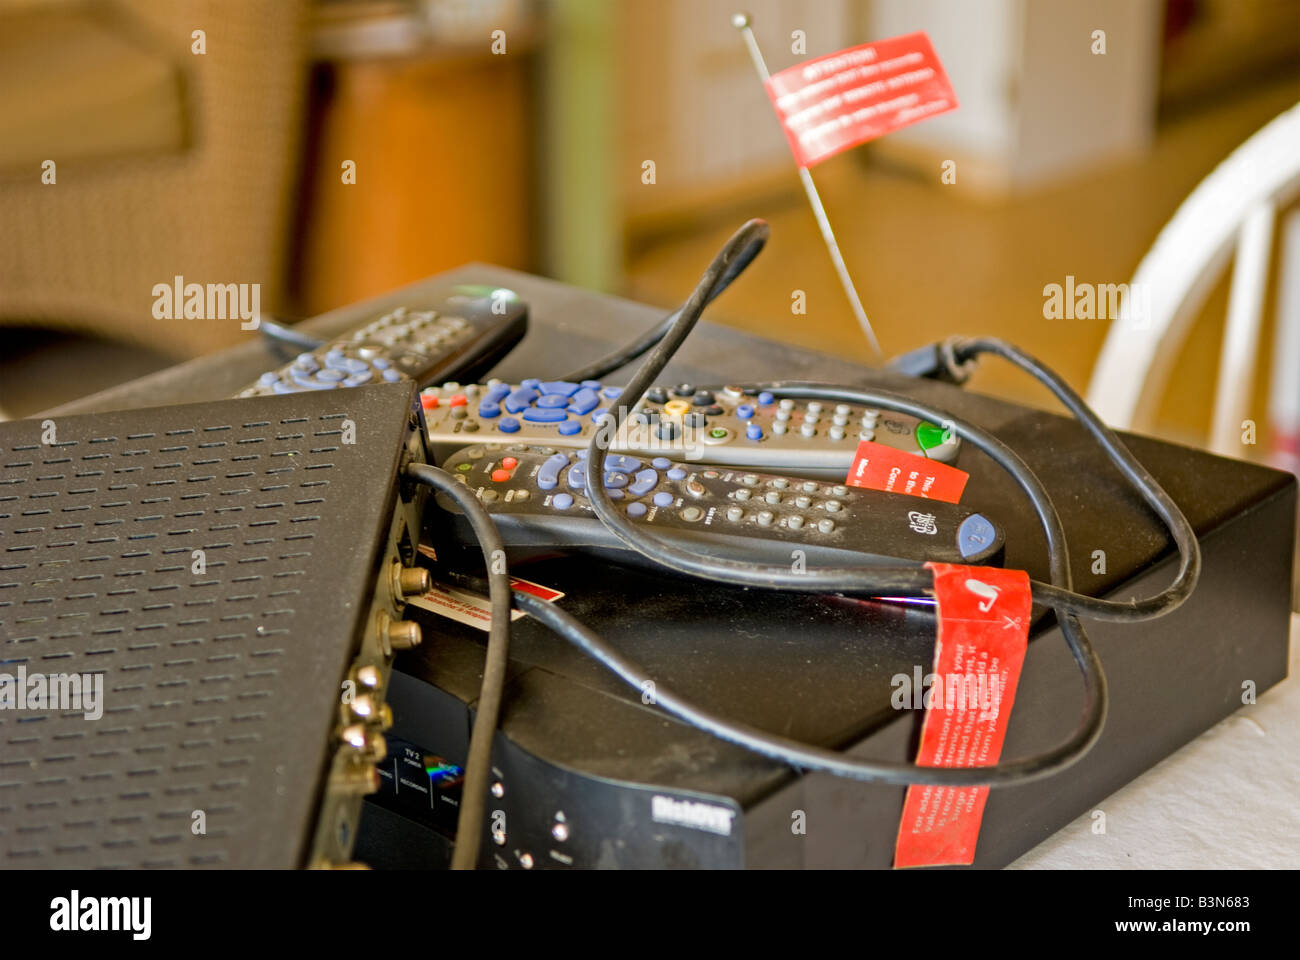 Canceling the cable - satellite equipment ready to go back - good signs of economic instability. Stock Photo